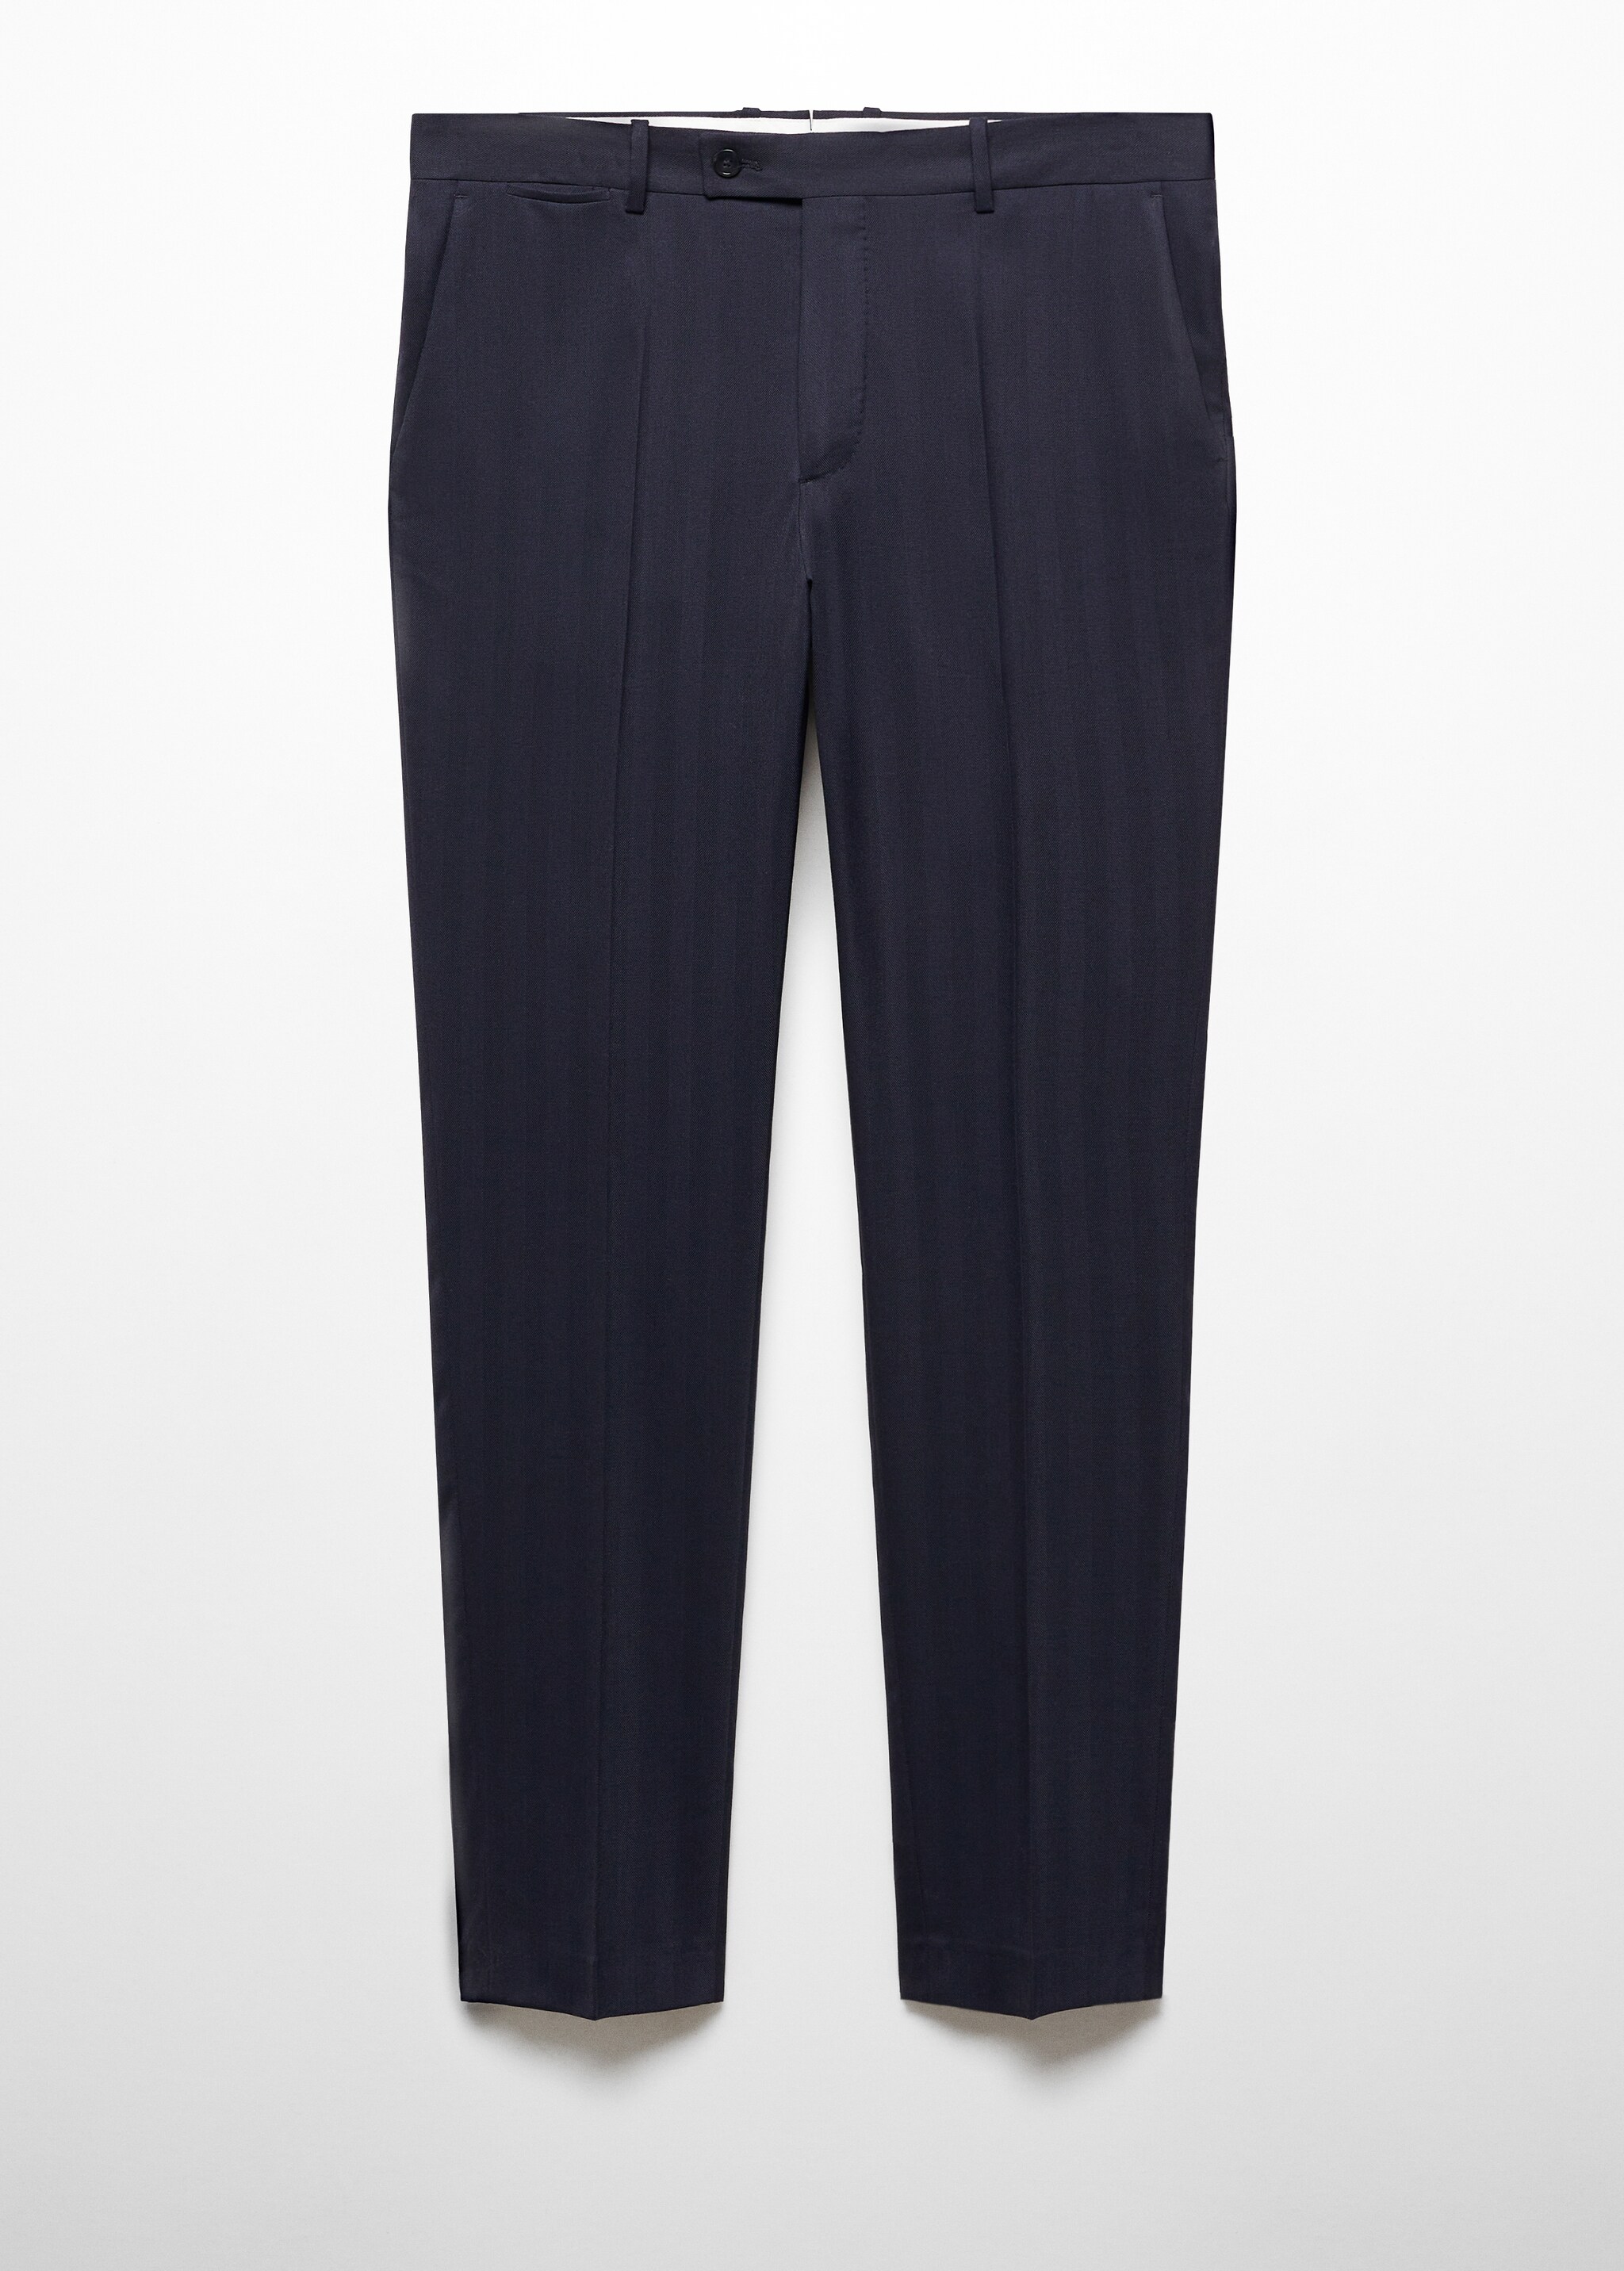 Slim fit cool wool suit trousers - Article without model